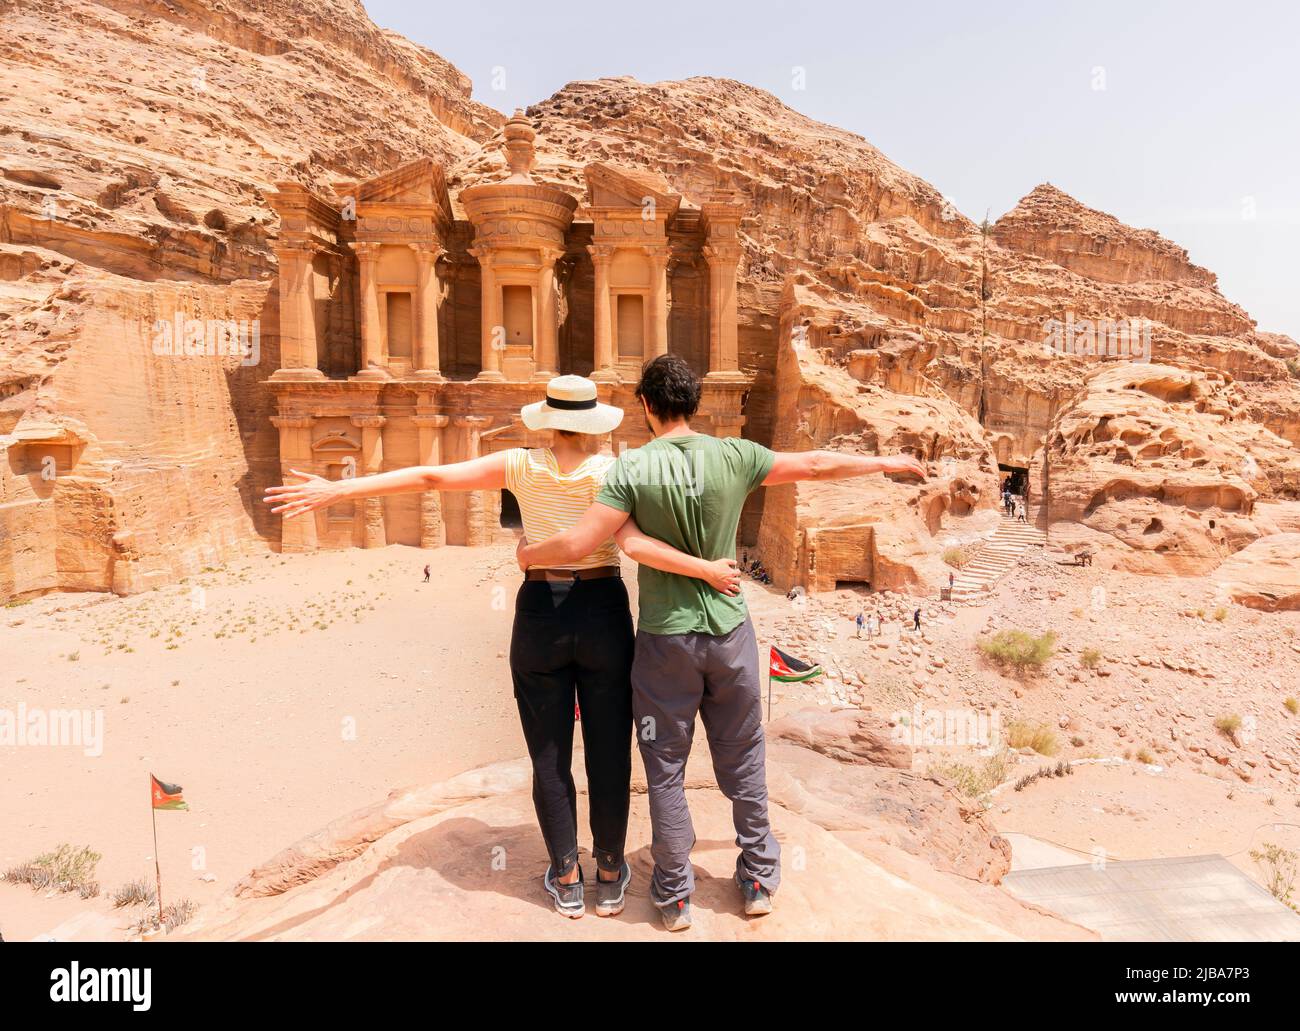 A young couple standing with open arms looking at the monastery of petra - Jordan - travel Stock Photo